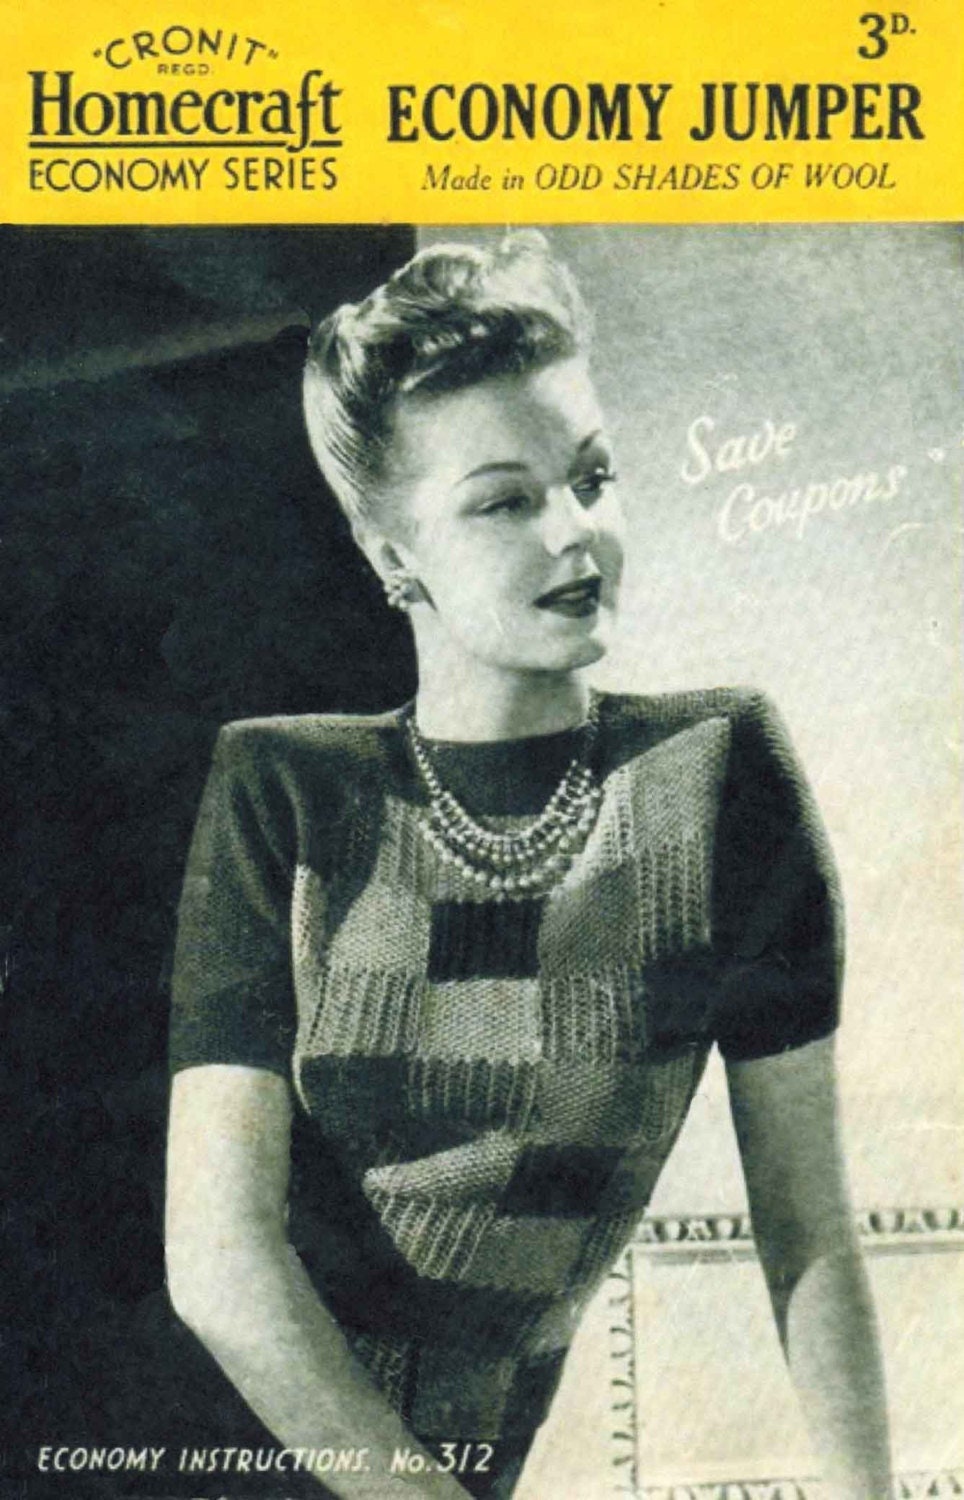 Ladies Jumper 34" Bust, 3 ply, Economy Recycle Your Unpicked Wool & Save Coupons, WW2 40s Knitting Pattern, Homecraft 312